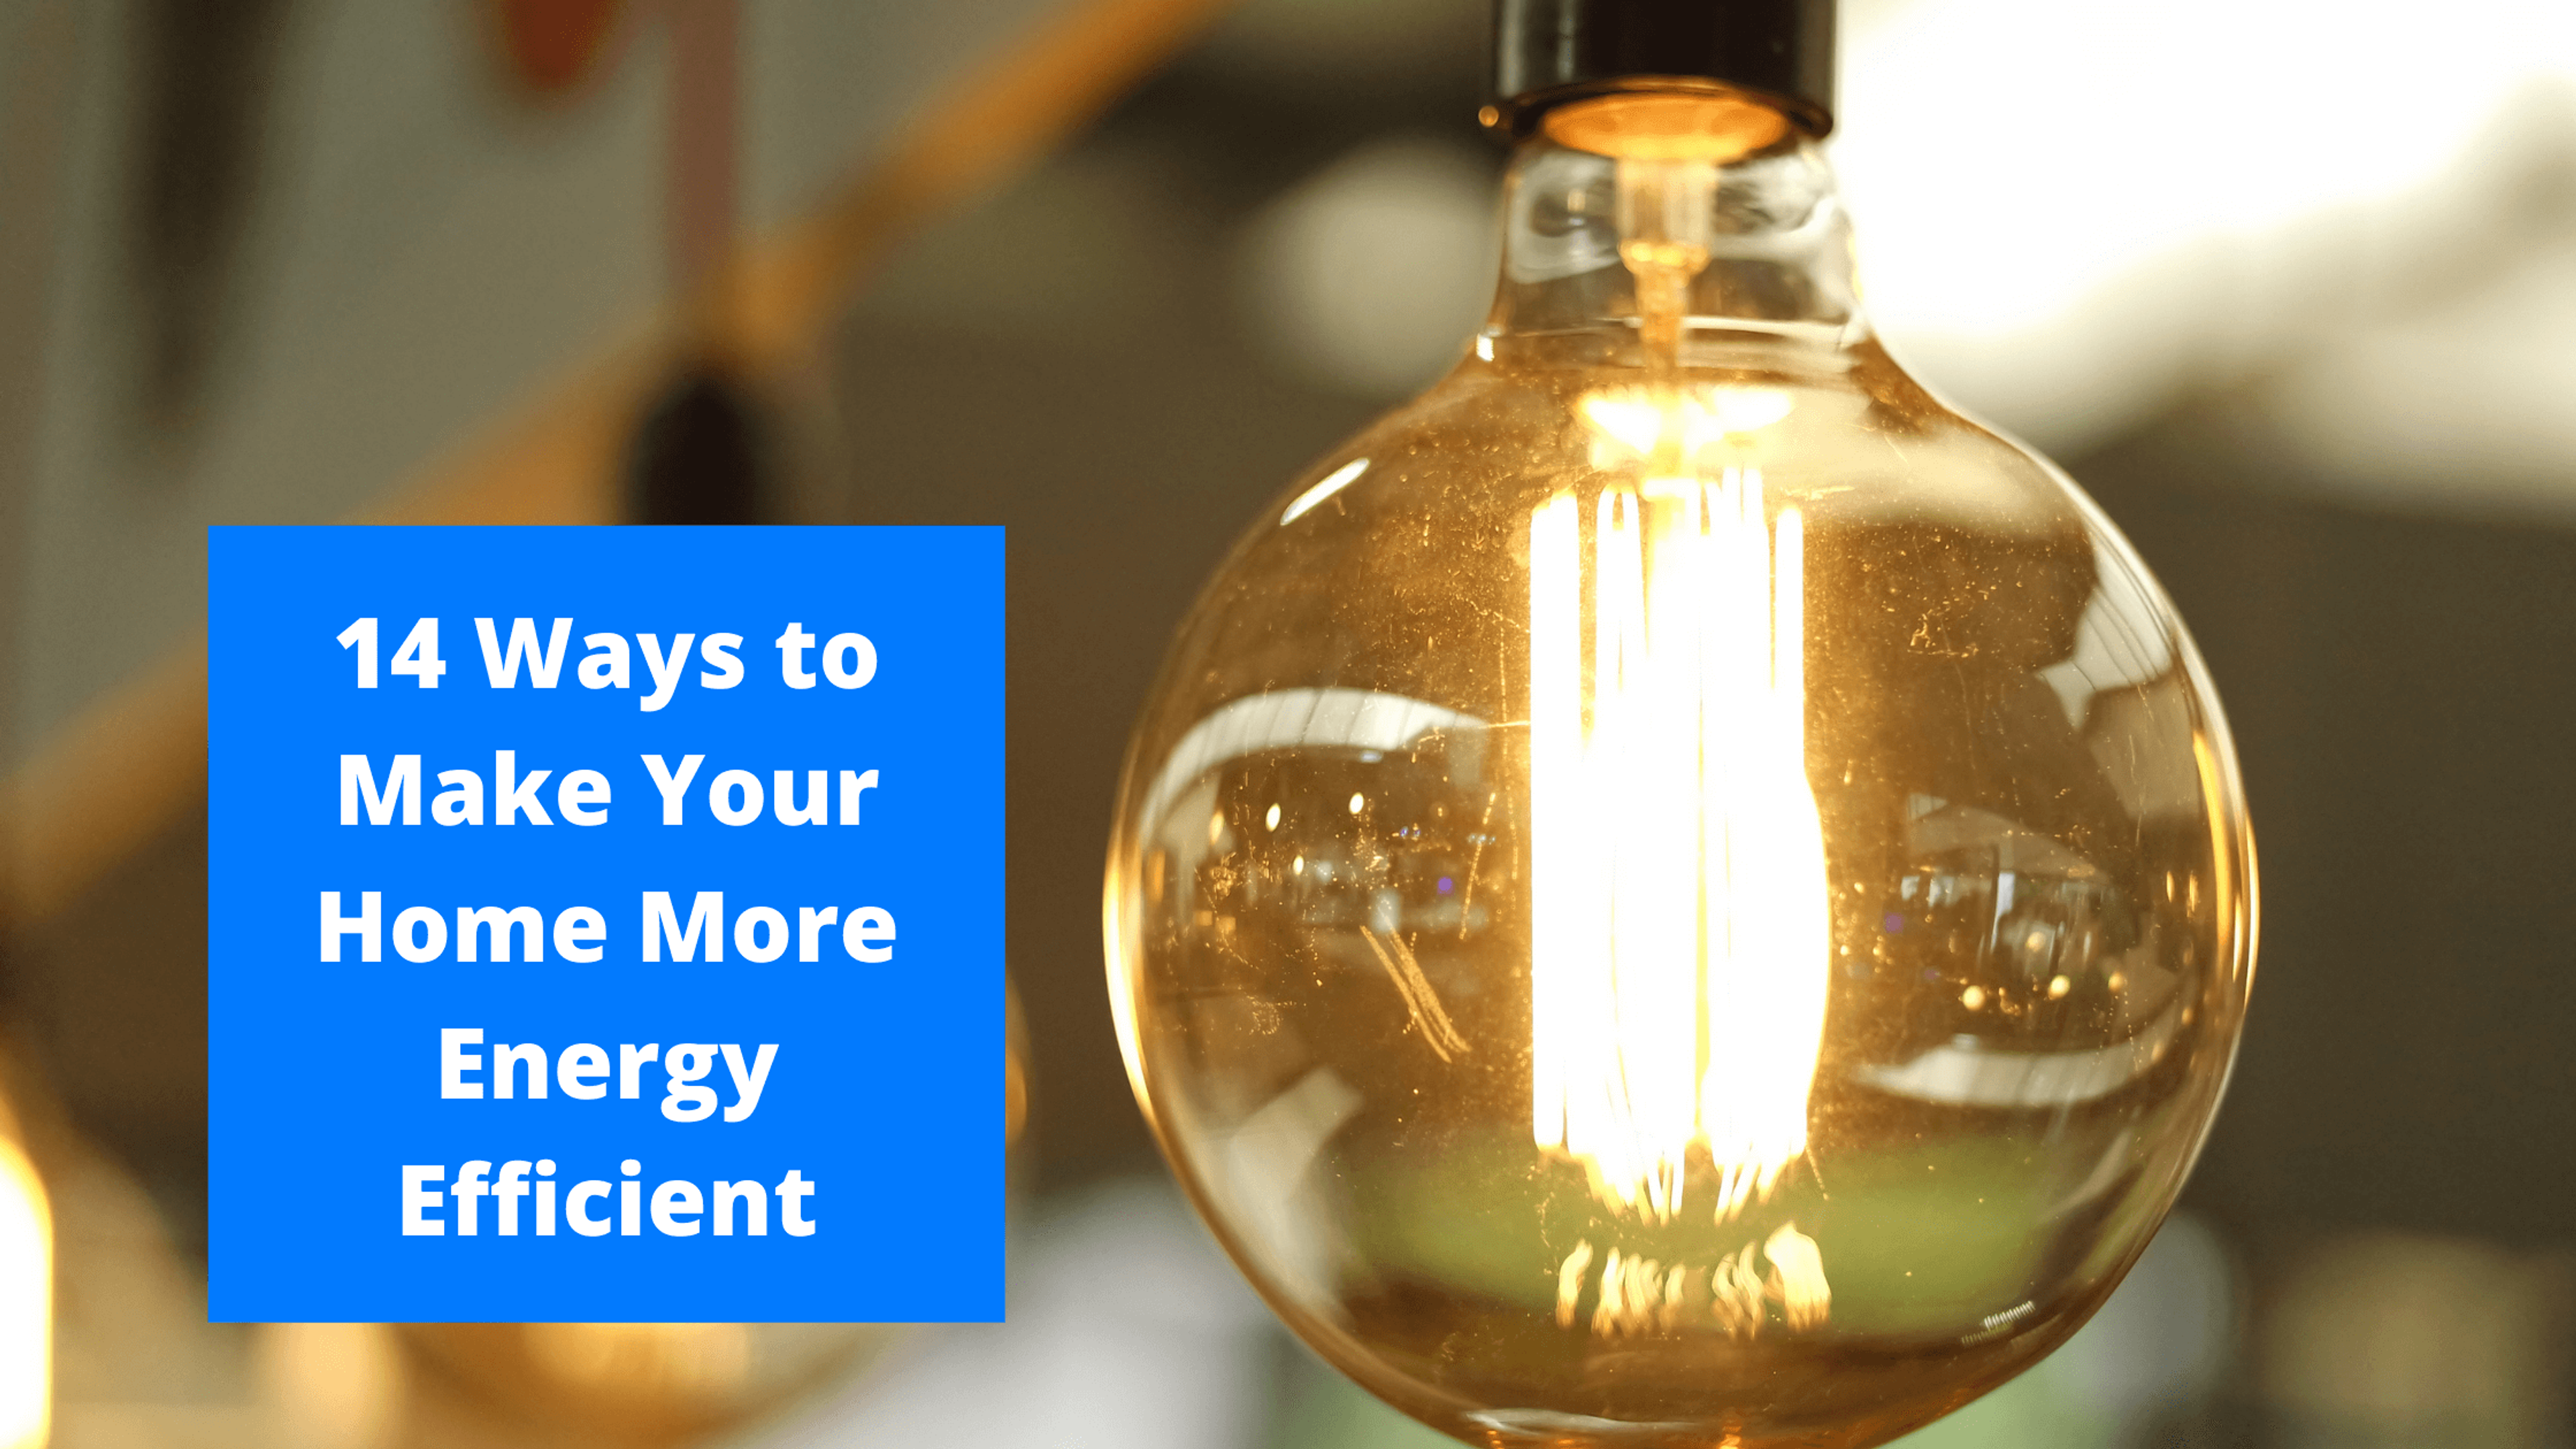 14 Ways to Make Your Home More Energy Efficient